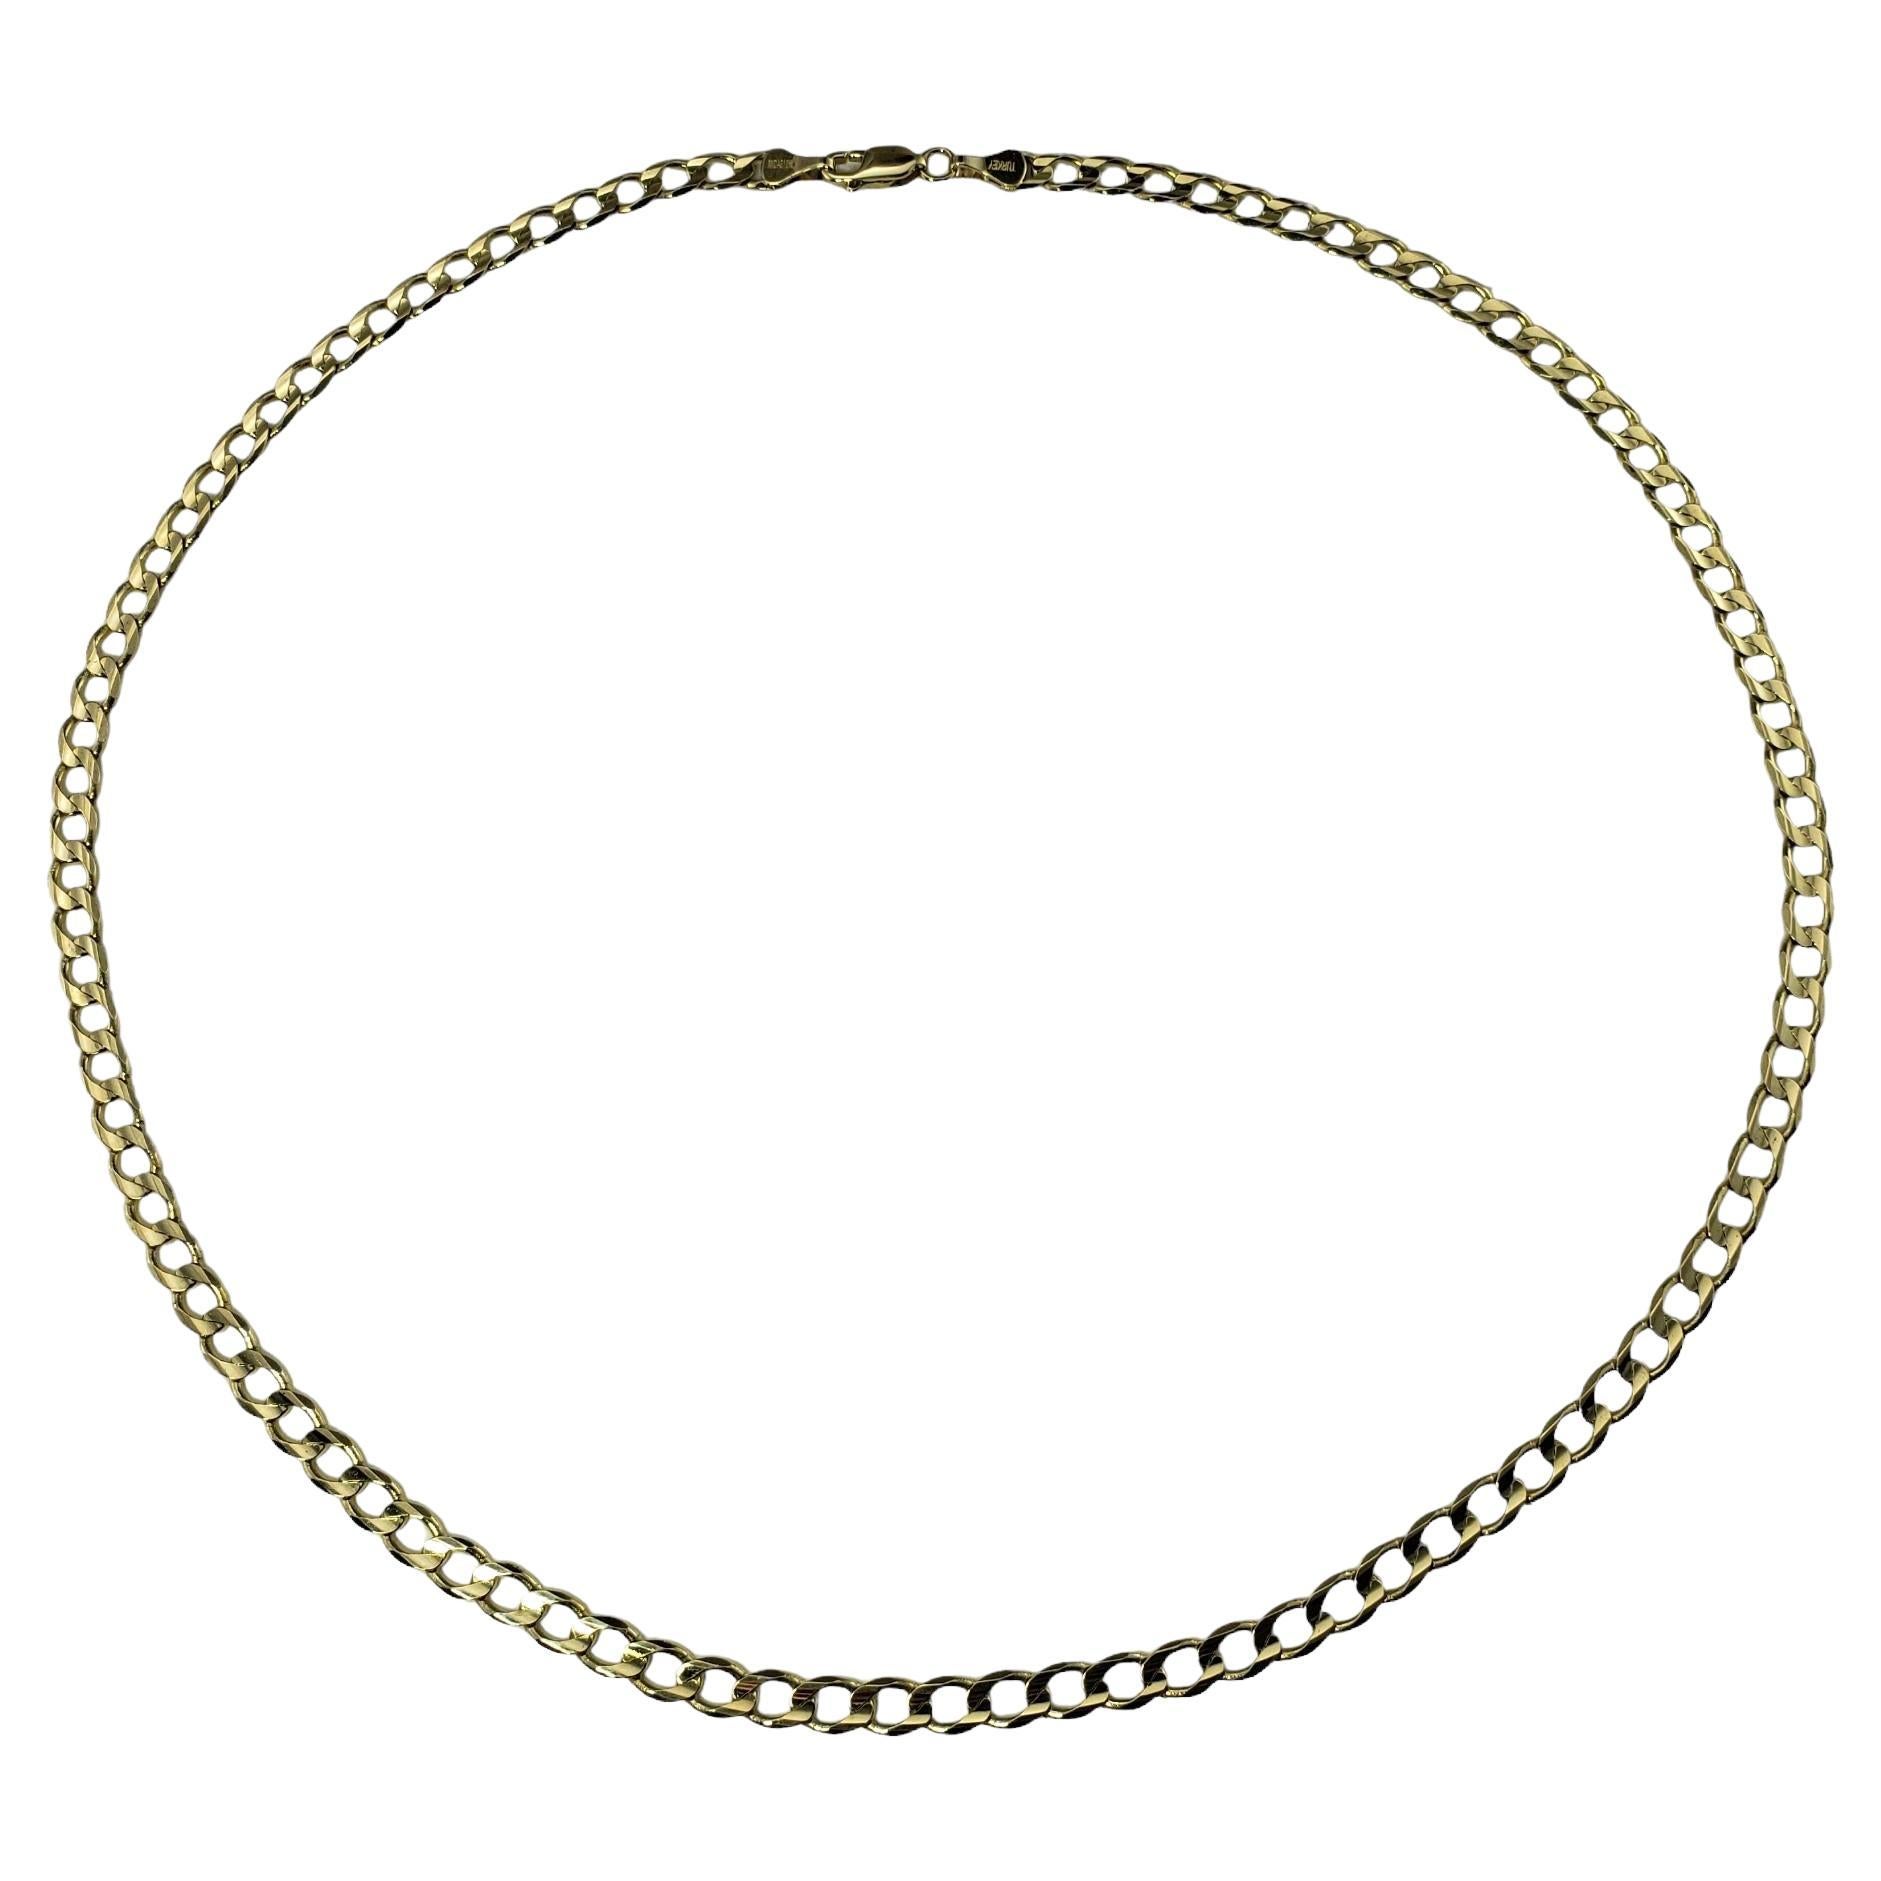 Vintage 10 Karat Yellow Gold Curb Chain Necklace #15329 For Sale